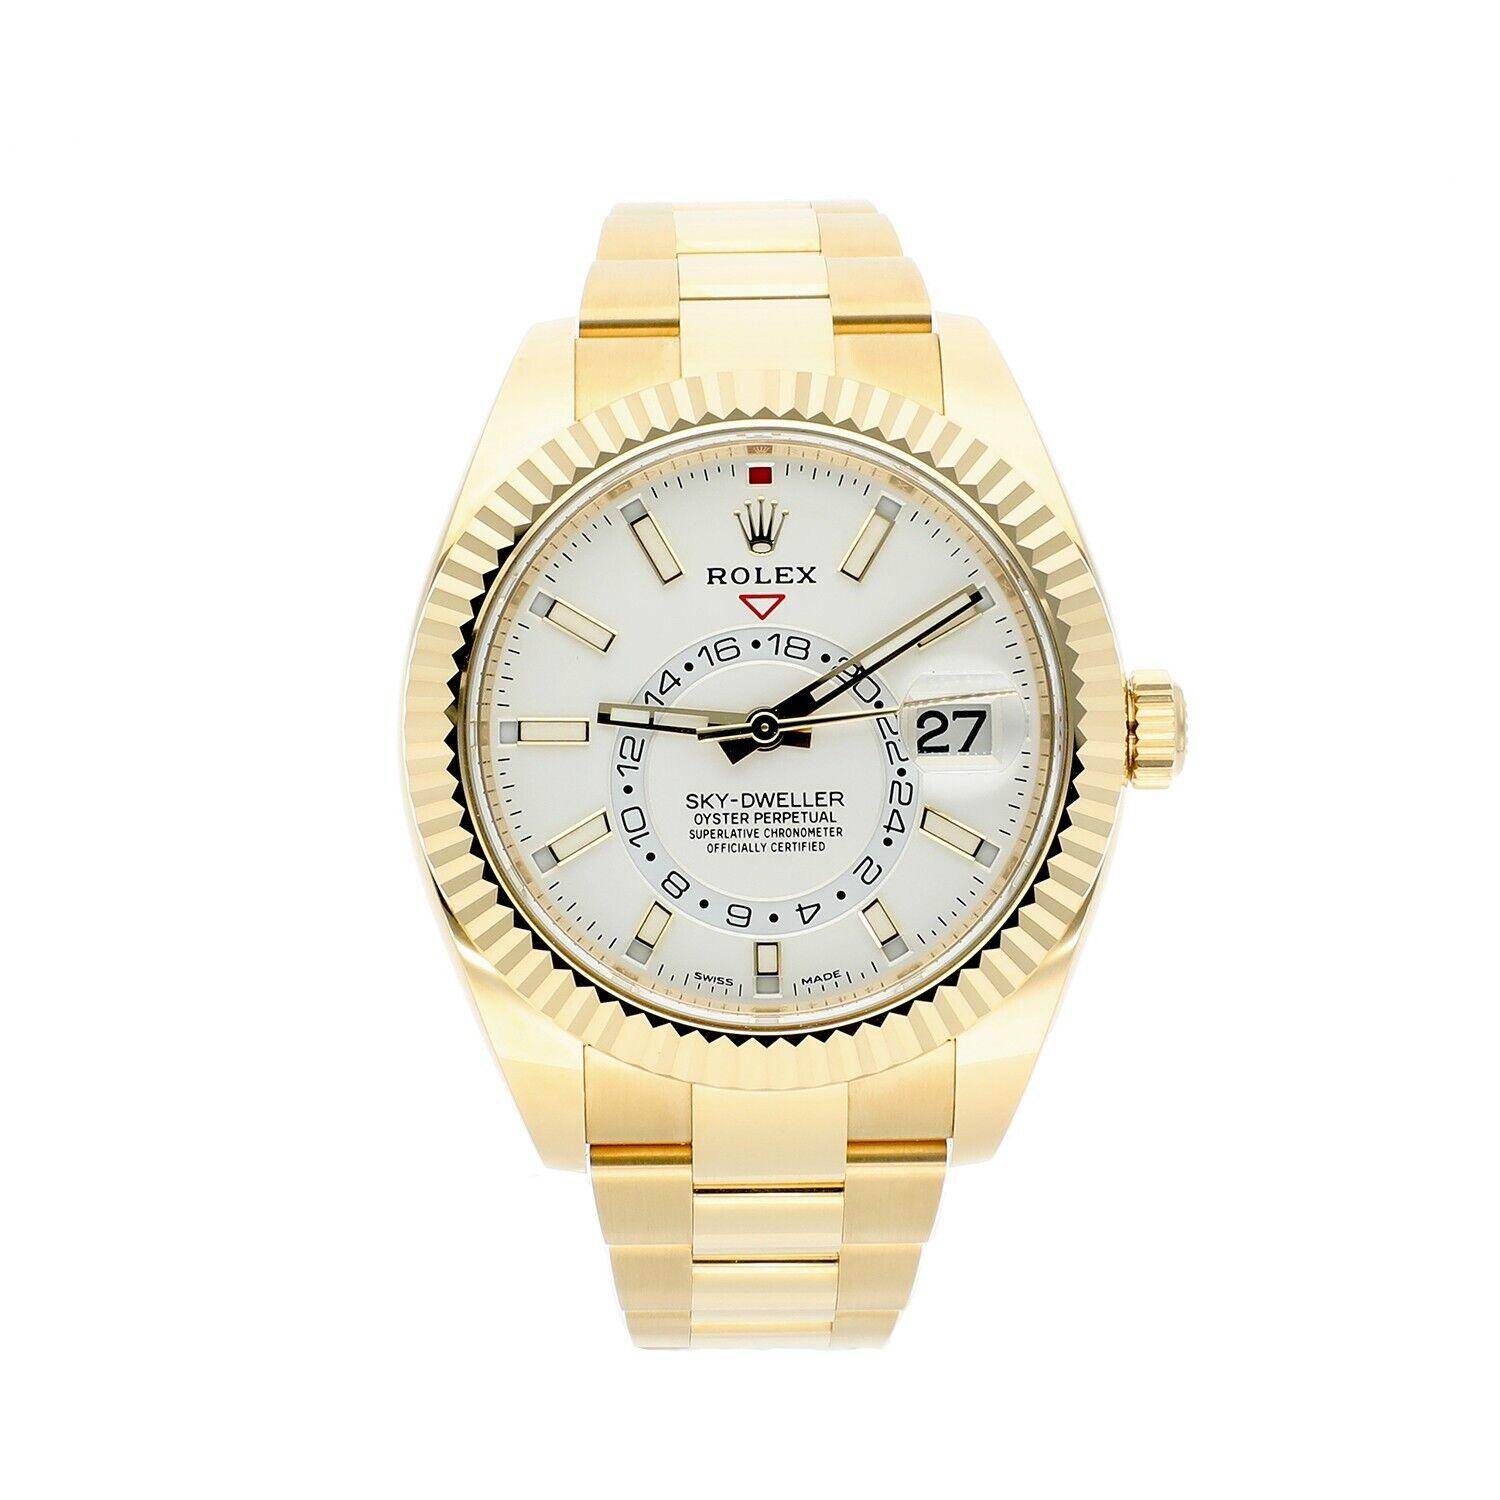 Rolex Sky-Dweller 42mm White Dial 18K Yellow Gold 326938 BOX & PAPERS, 2021

“MINT CONDITION. NO SIGNS OF WEAR, NOT POLISHED”

18kt yellow gold case with a 18kt yellow gold rolex oyster bracelet. Fluted ring command 18kt yellow gold bezel. White